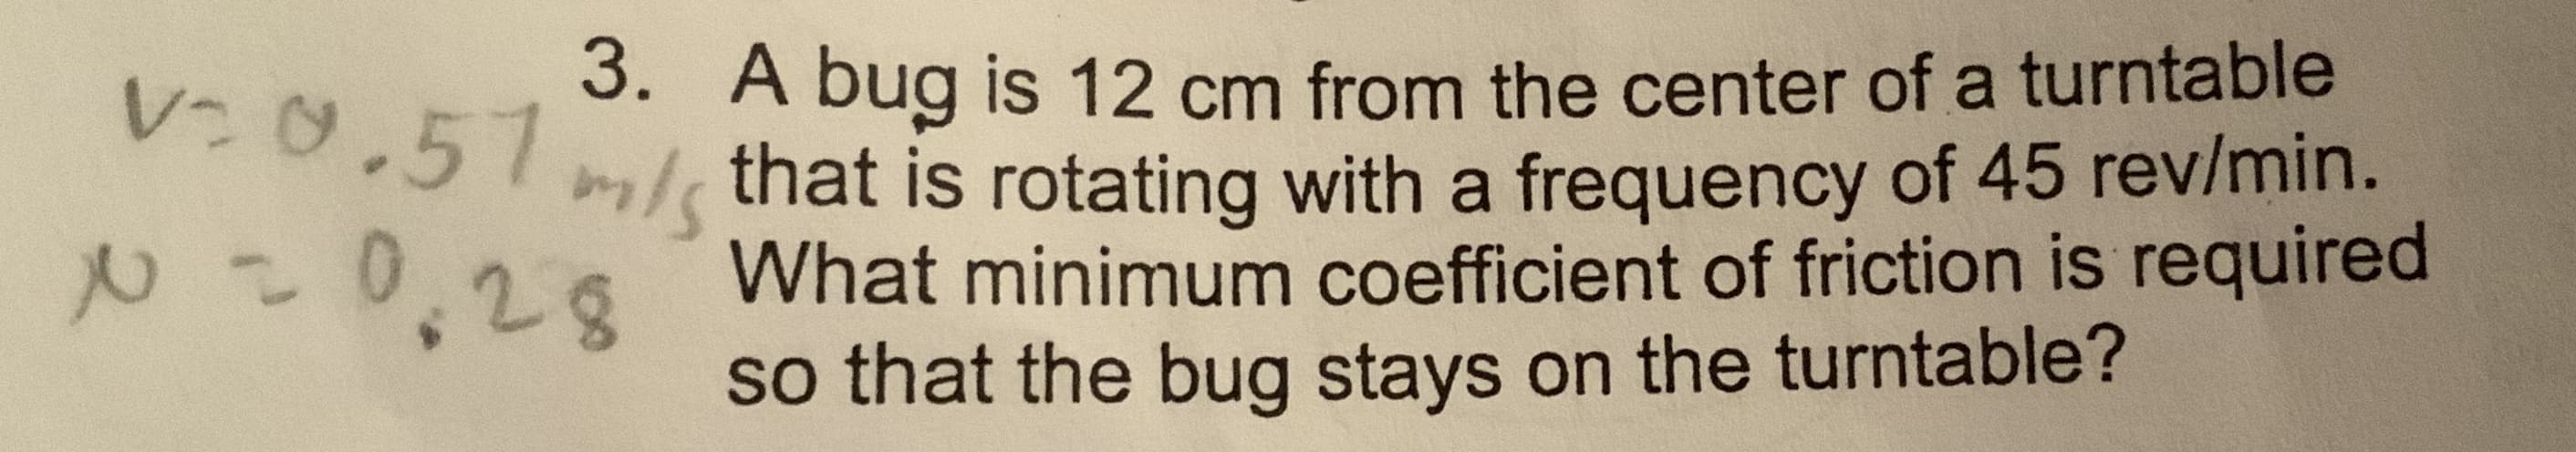 3. A bug is 12 cm from the center of a turntable
m/ that is rotating with a frequency of 45 rev/min.
What minimum coefficient of friction is required
V:0.51
28
so that the bug stays on the turntable?
